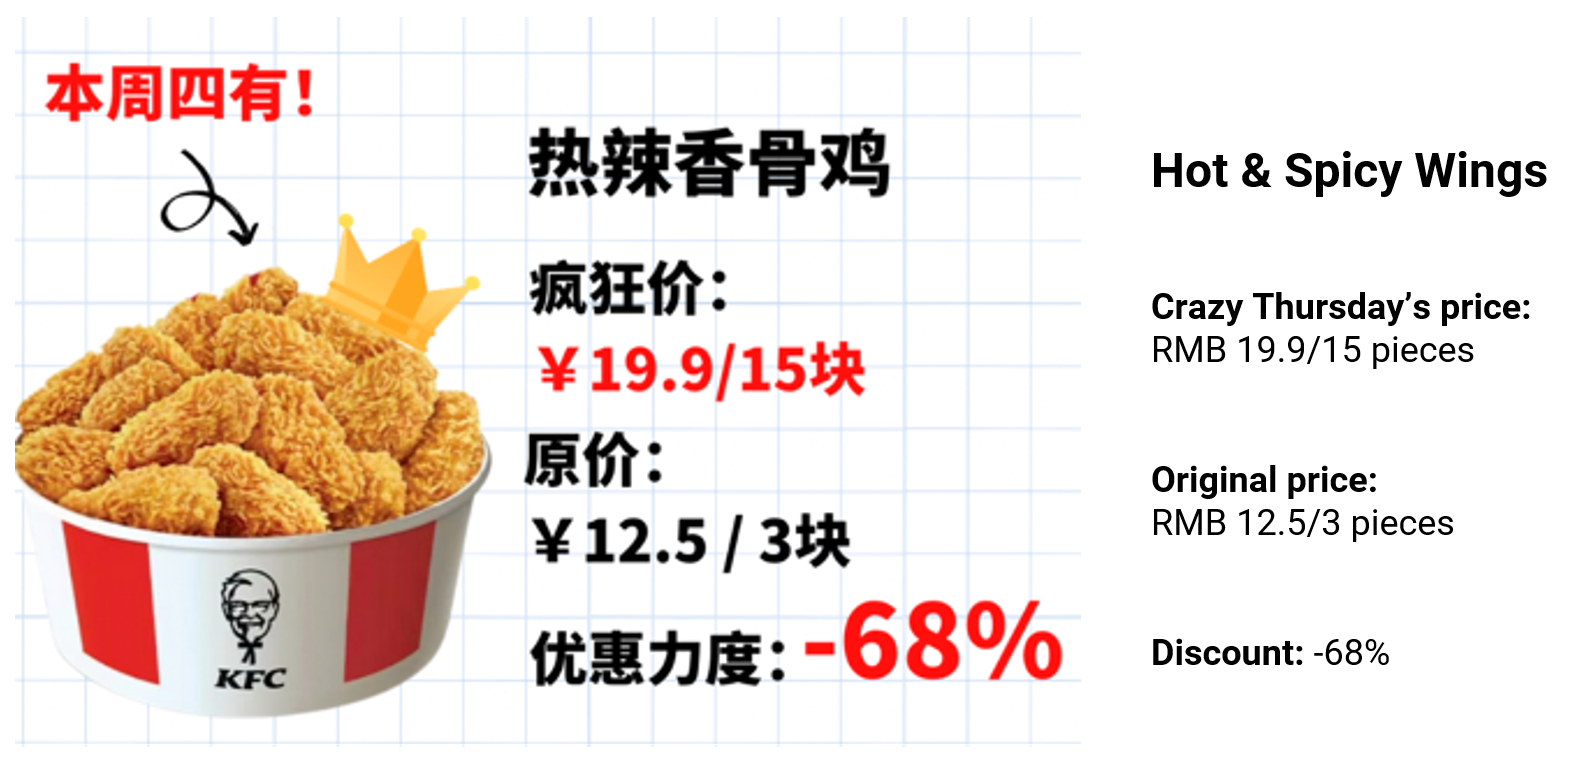 KFC food price in and out KFC’s Crazy Thursday